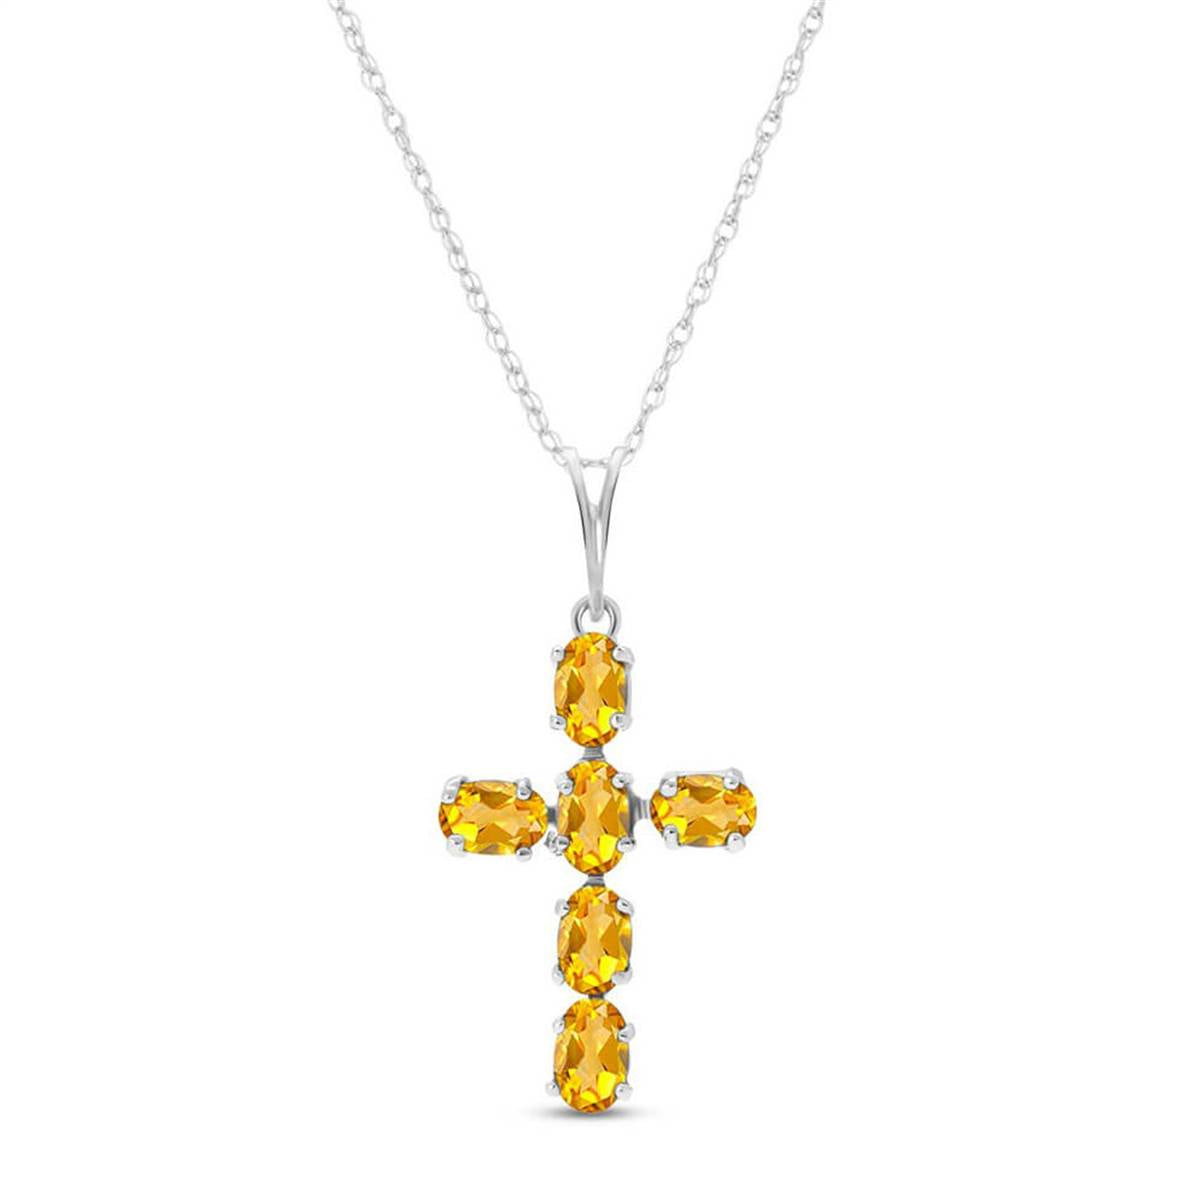 1.5 Carat 14K Solid White Gold Cross Necklace Natural Citrine